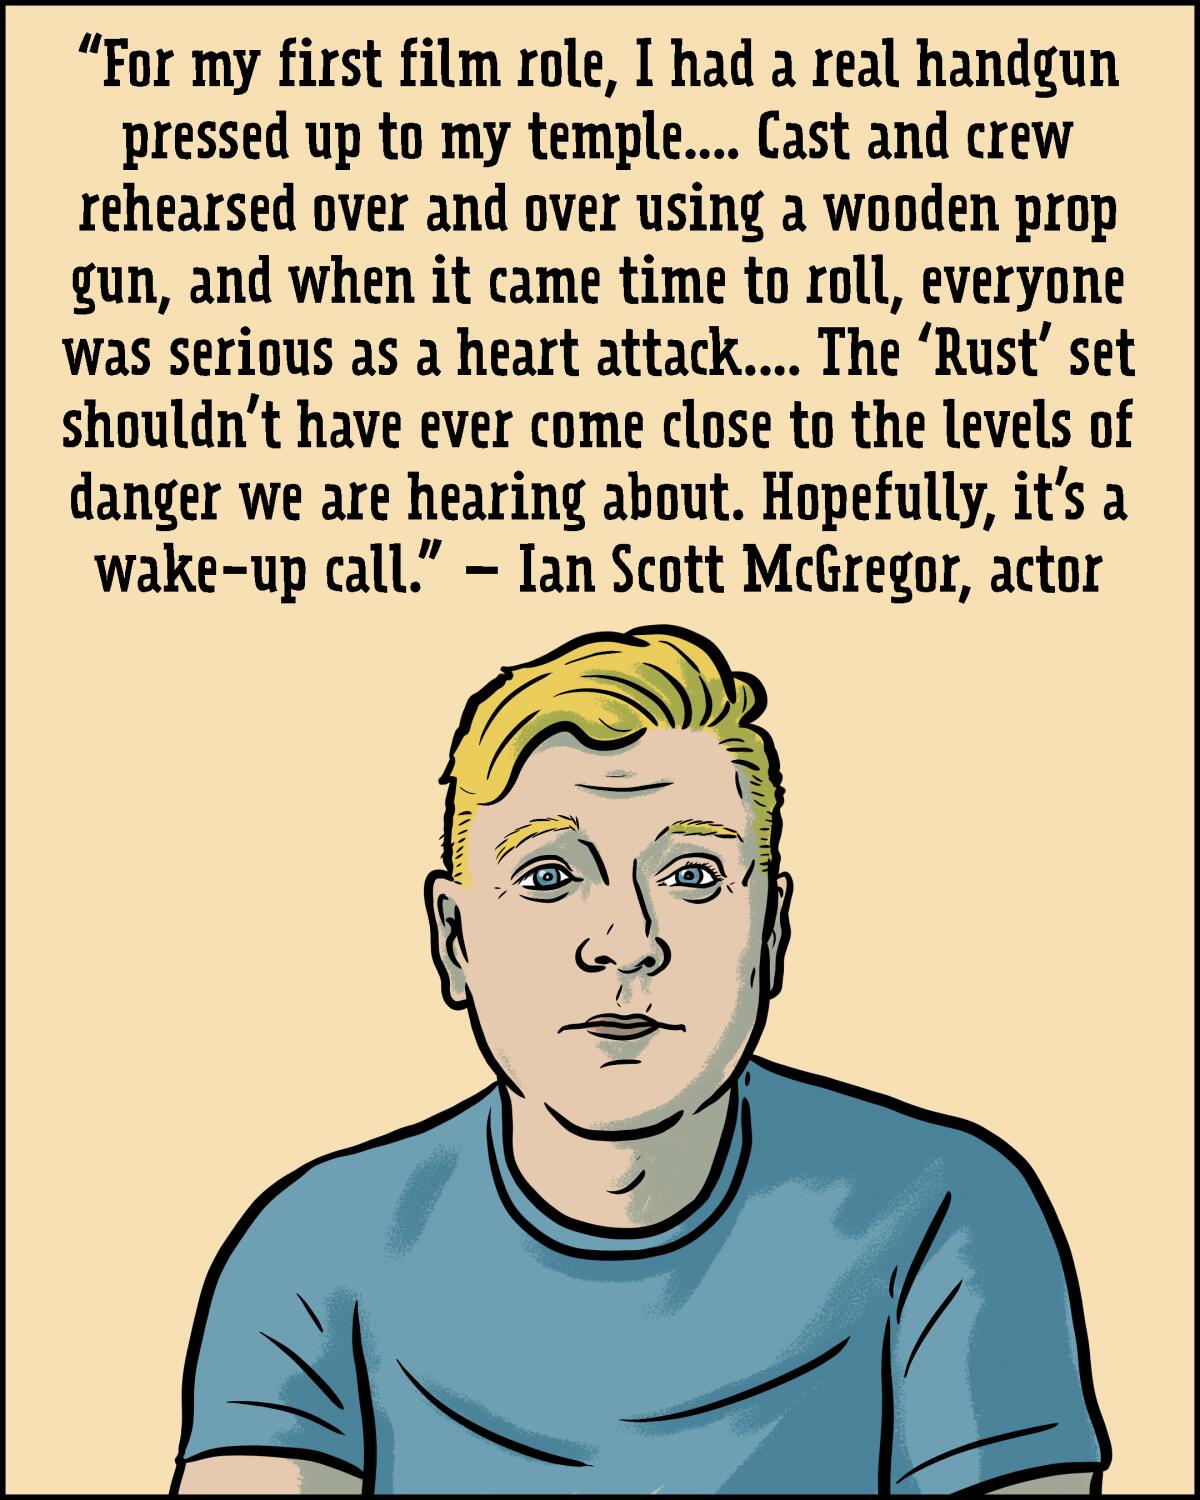 Illustrated portrait of a man with blond hair wearing a blue T-shirt. 